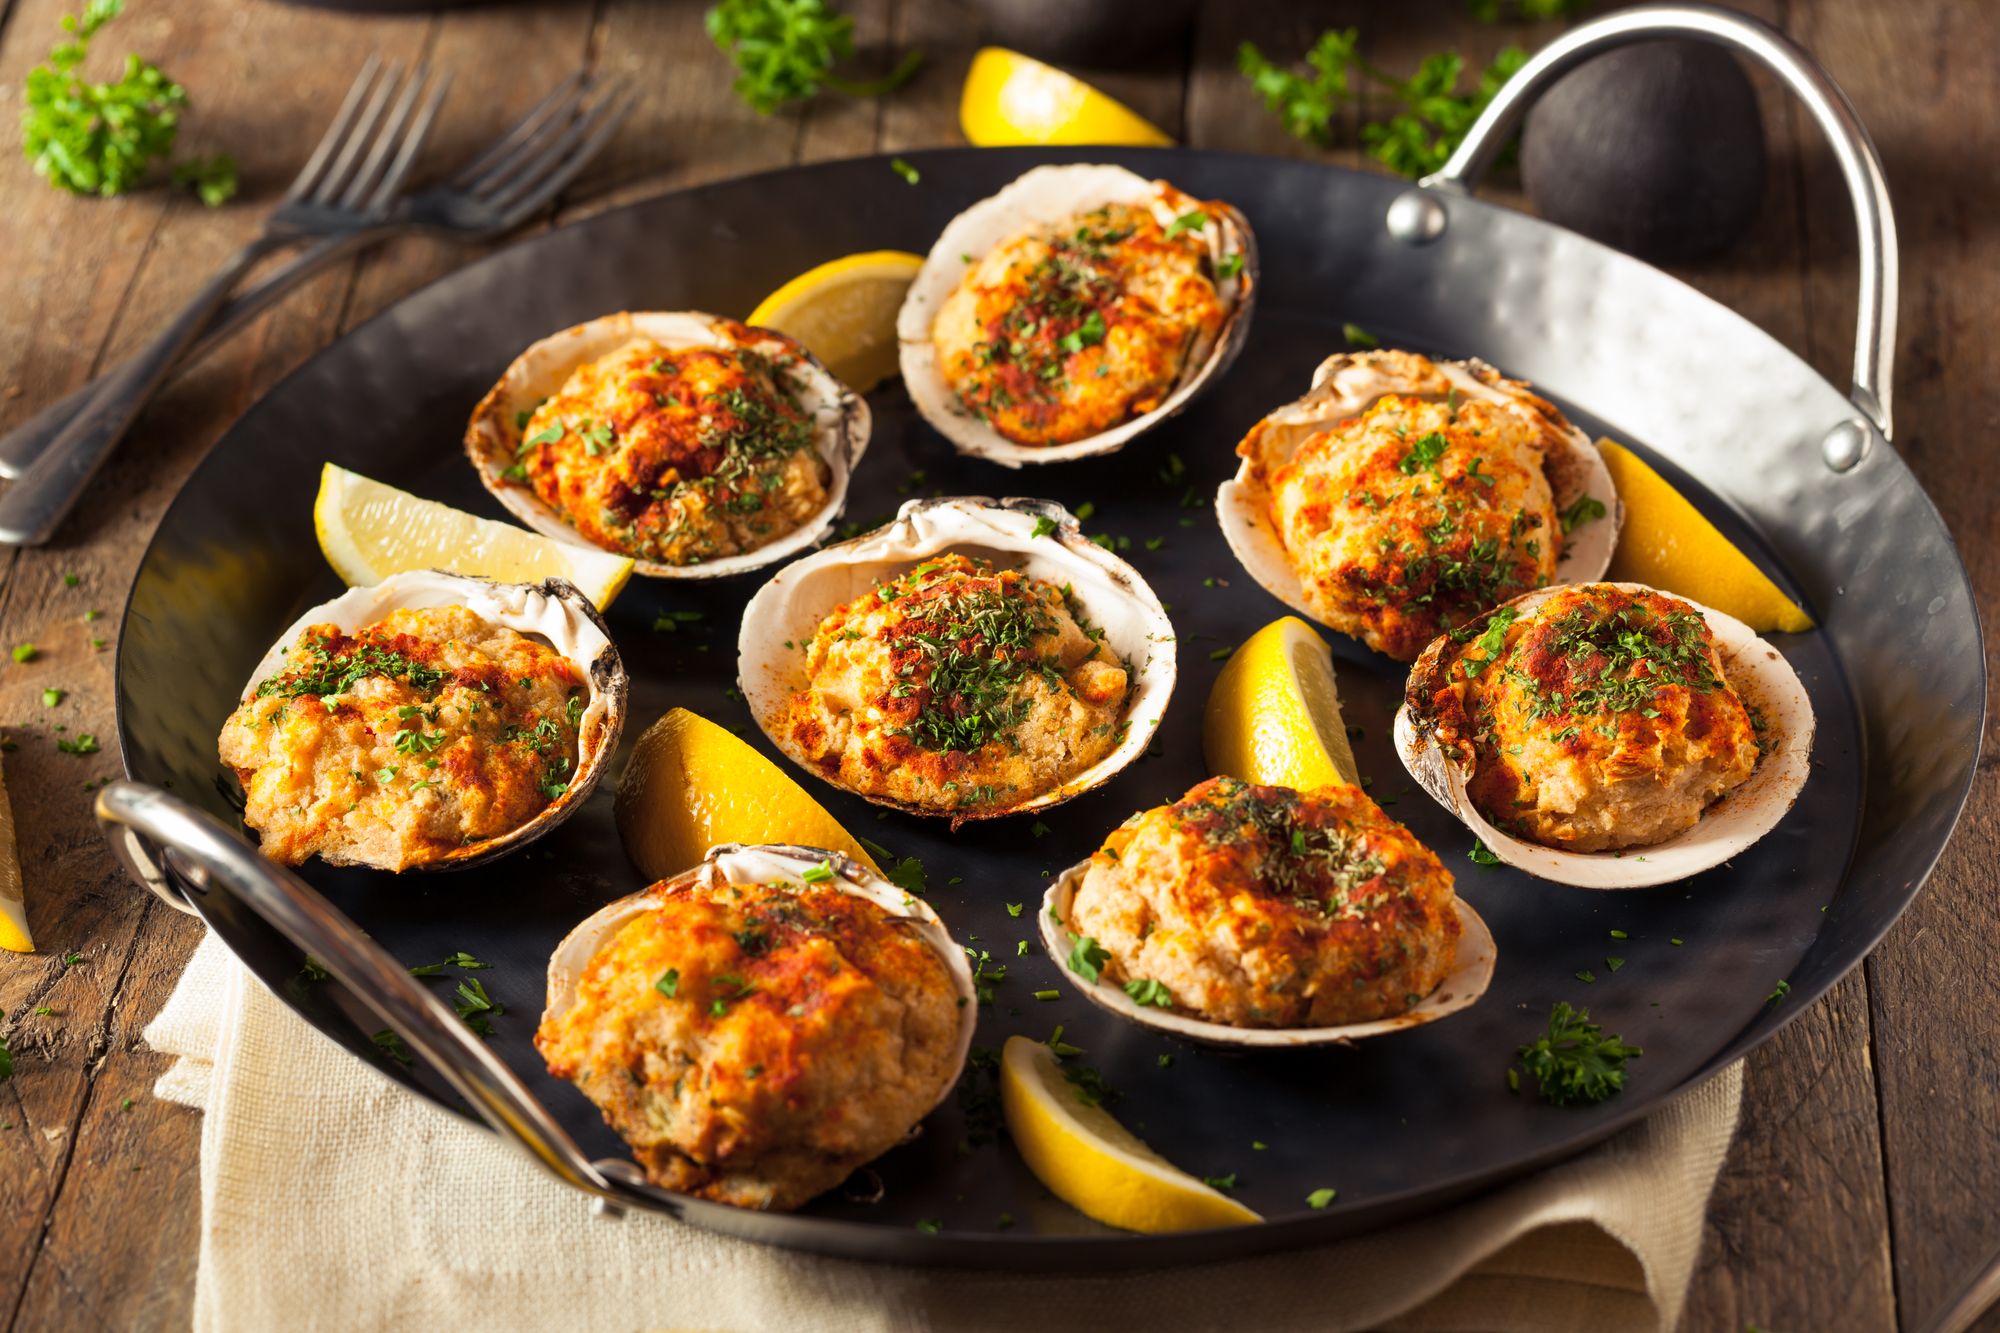 Baked Clams with Fennel and Shallots